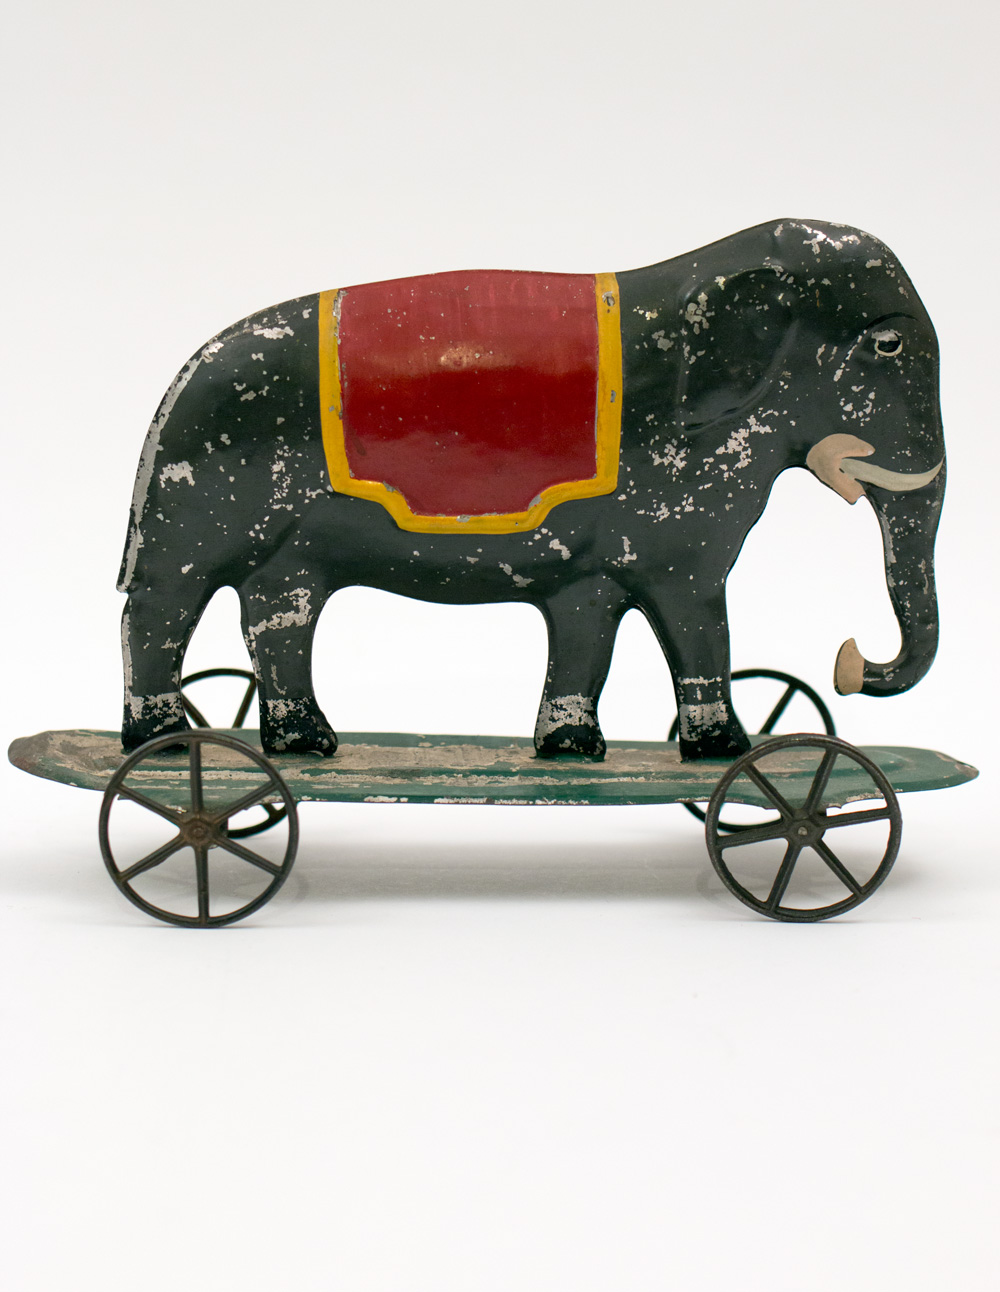 Early Antique American Tin Pull Toy Elephant on Wheel Platform